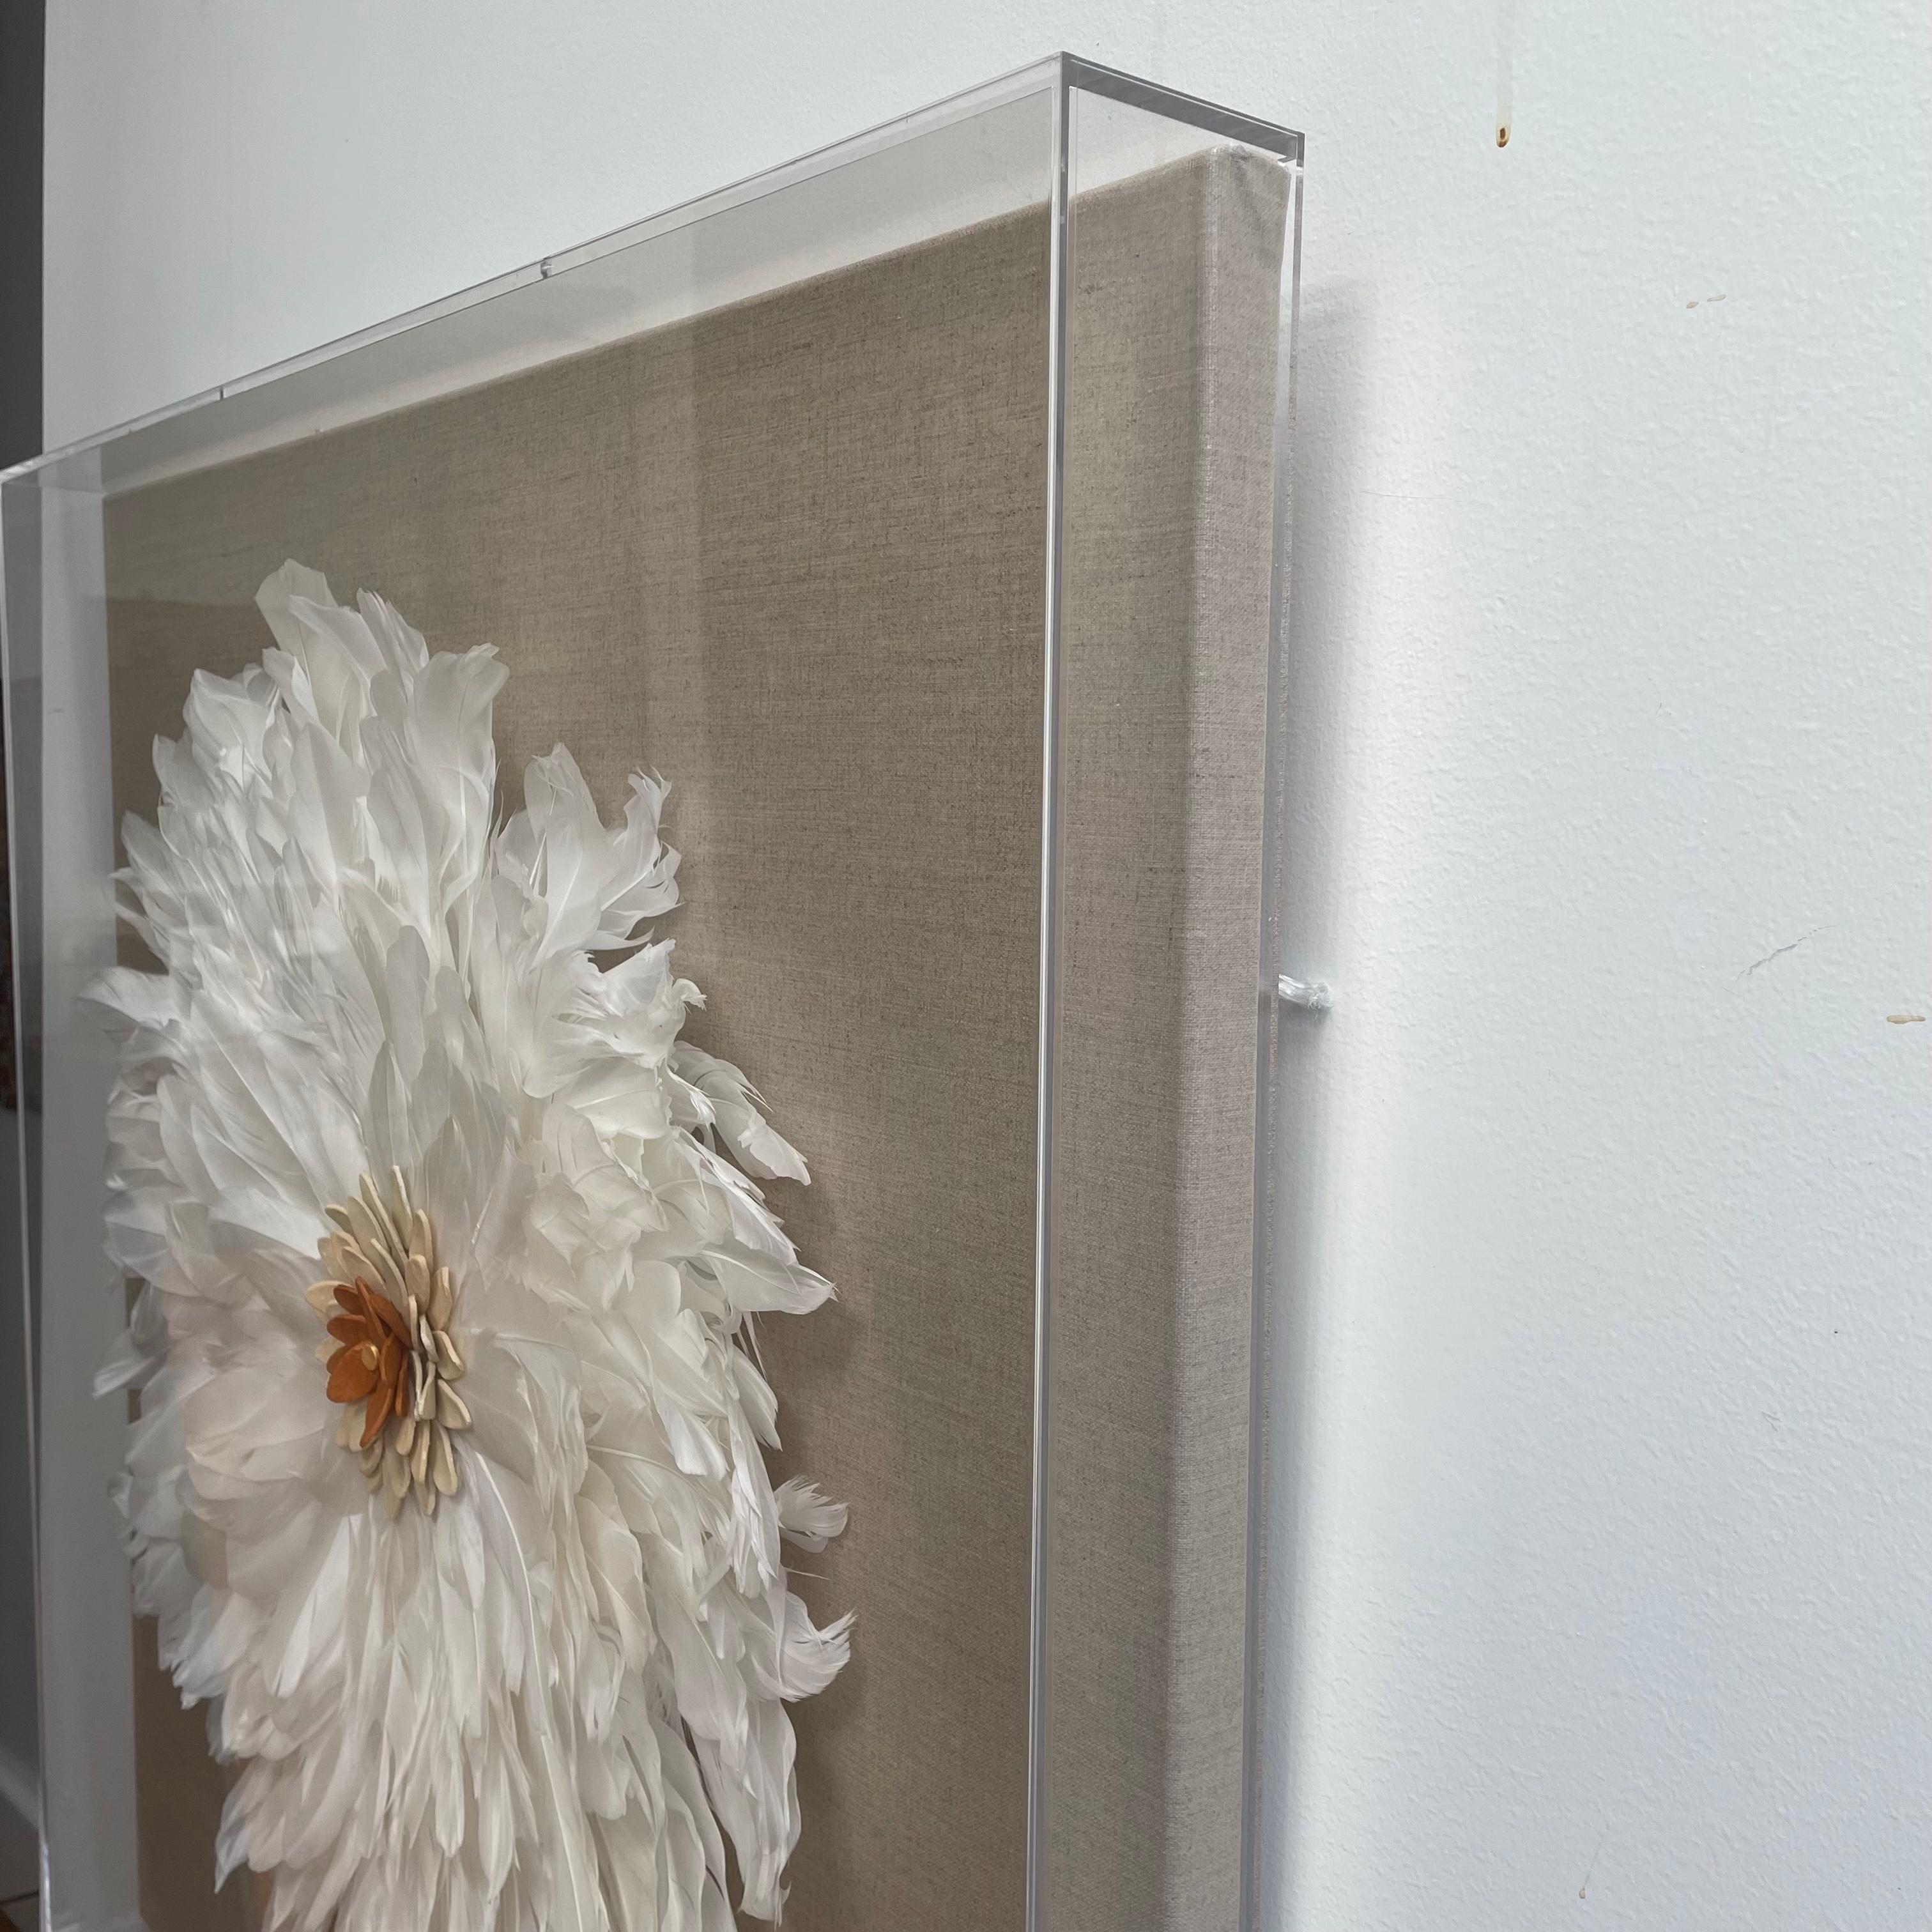 Marie Laforey is a self-taught artist based in New York, US who maintains a sustainable art practice using primarily organic material. Laforey enjoys the tactility of working with organic mediums and learning how to craft preserved moss, feathers,